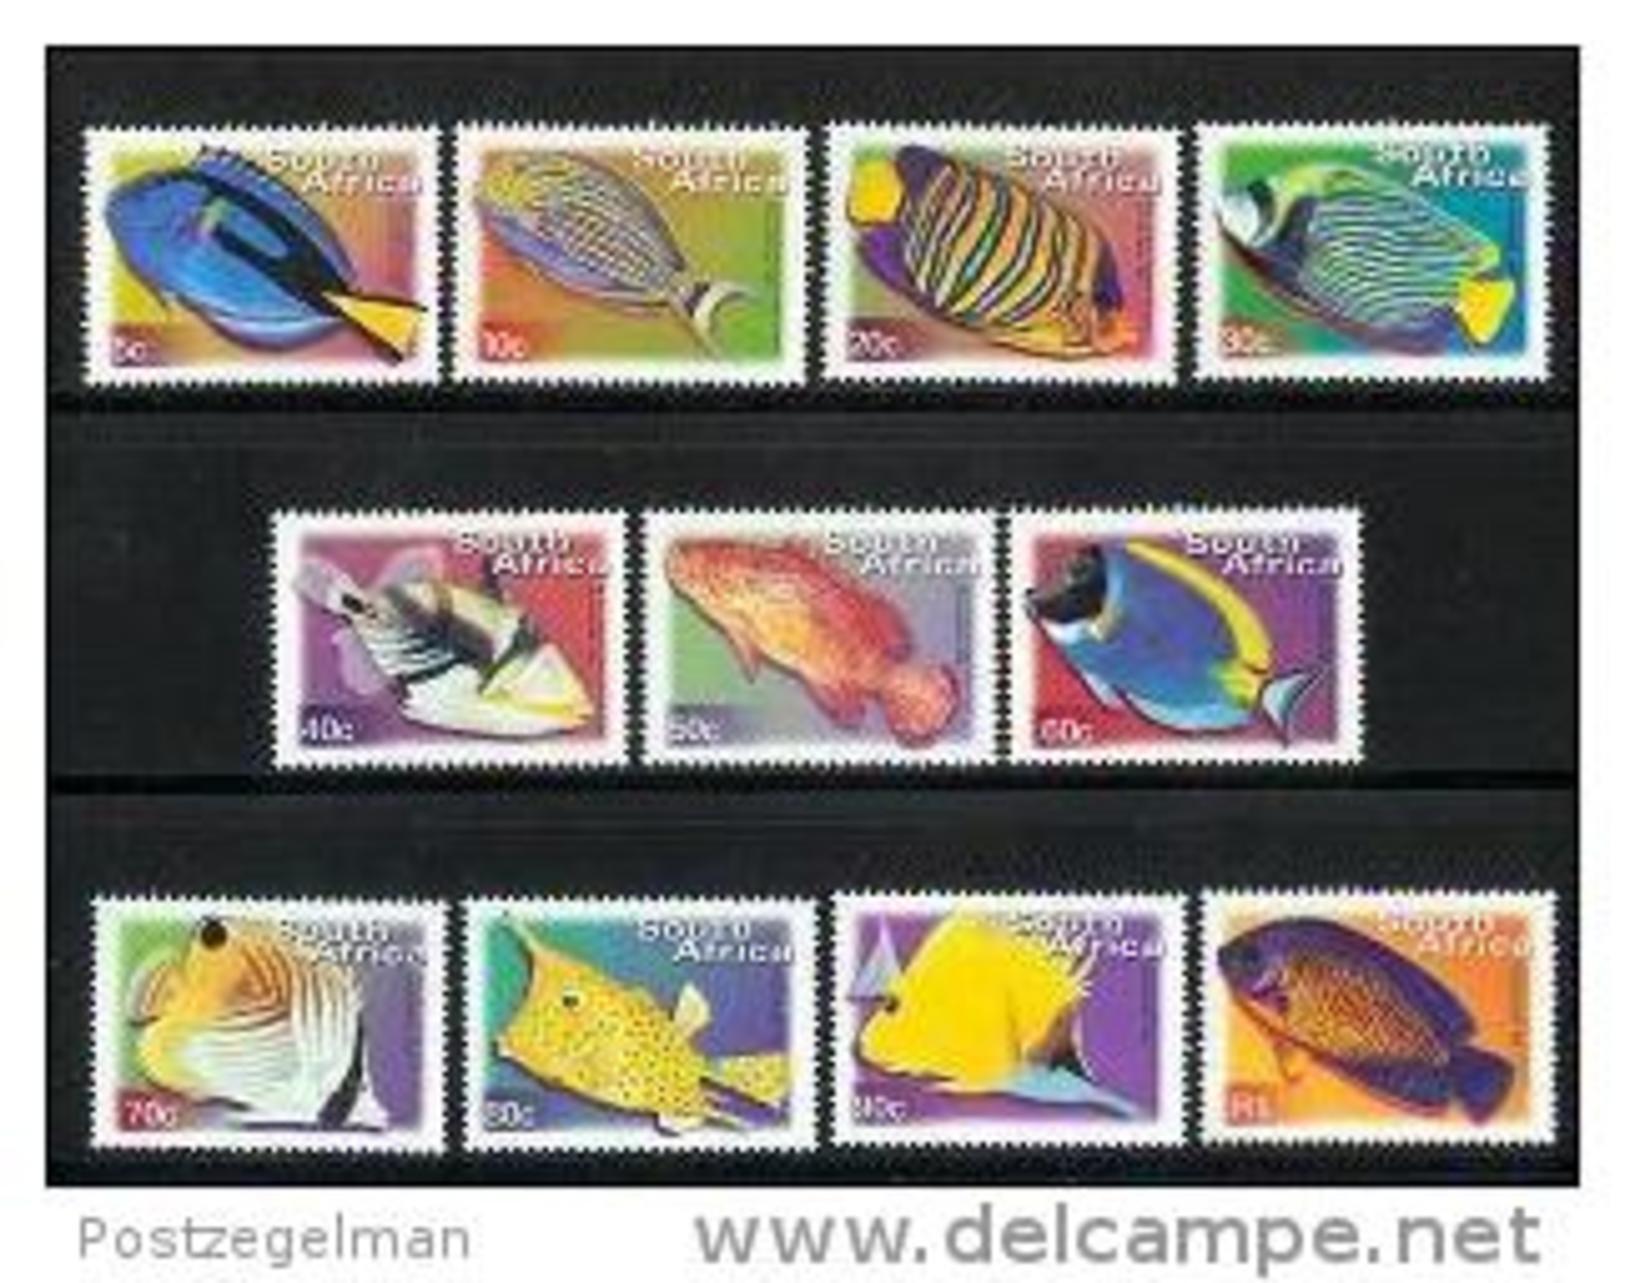 SOUTH AFRICA, 2001, Mint Never Hinged Stamp(s), Definitives Fishes (11 Stamps), Nr(s) 1285-1295 #6756-8 - Unused Stamps